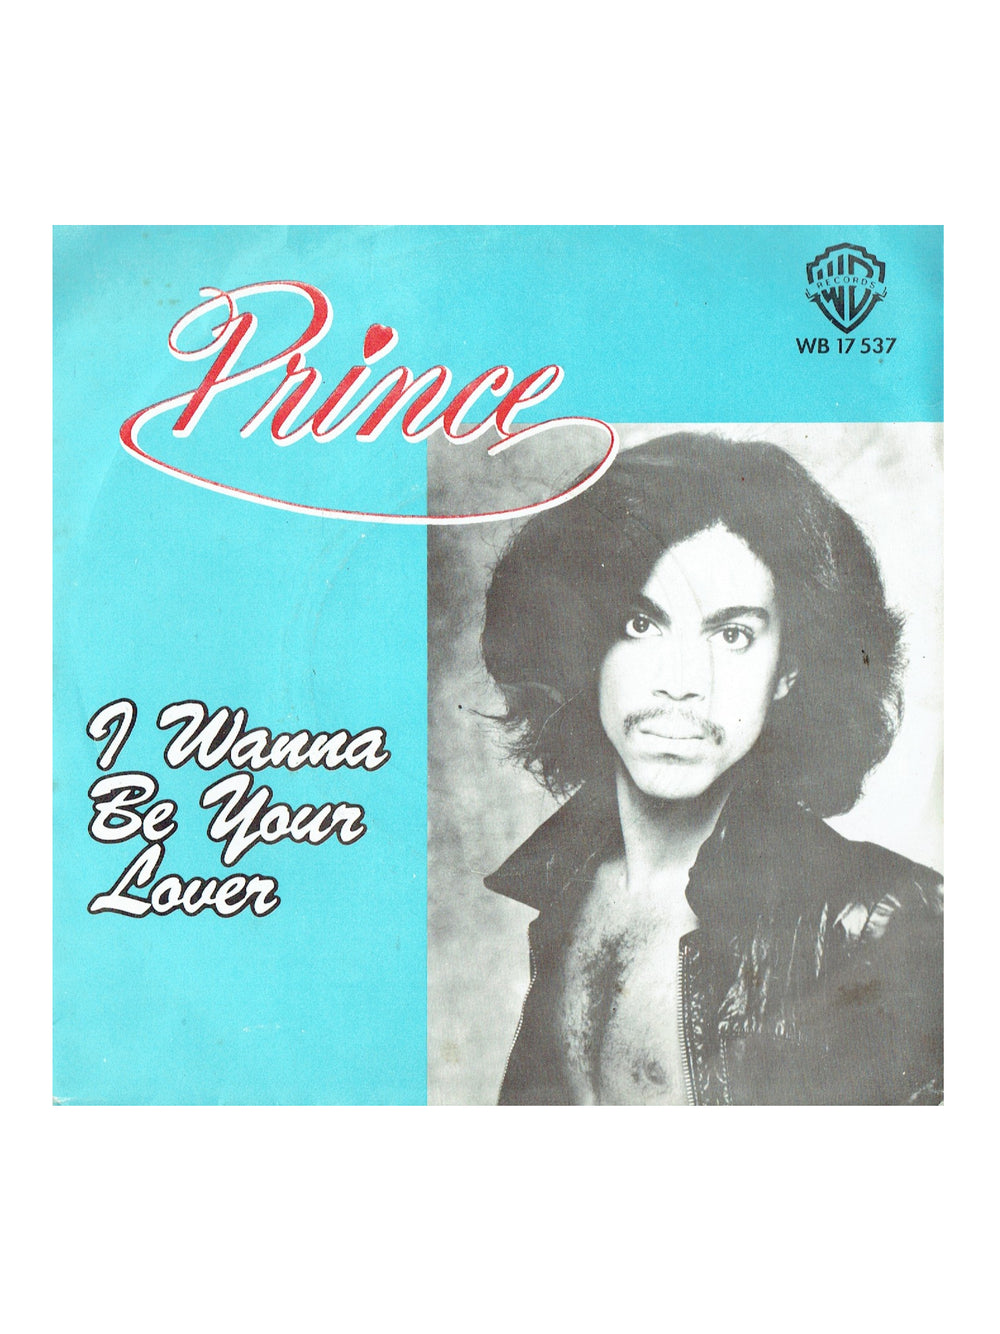 Prince I Wanna Be Your Lover 7 Inch Vinyl Single Picture Sleeve WB 17 537